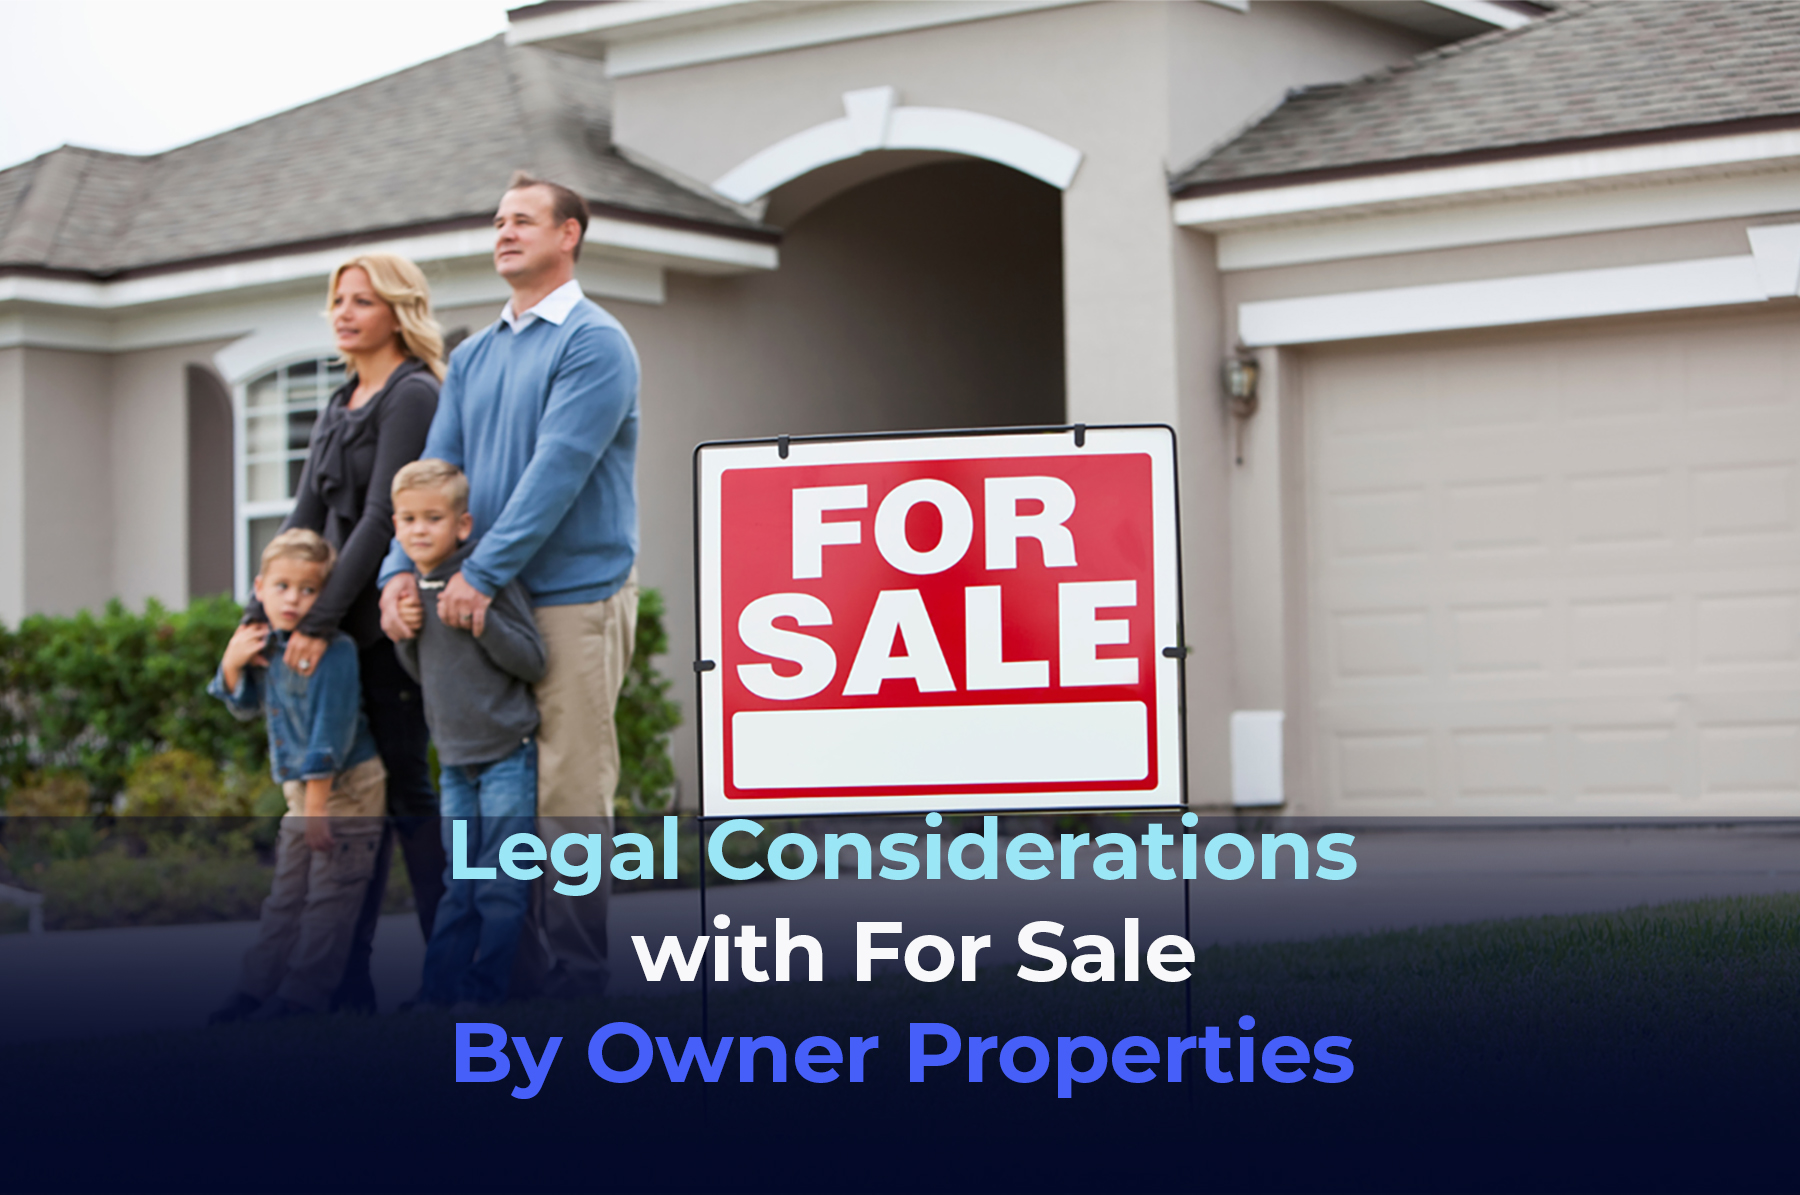 https://www.southfloridalawpllc.com/wp-content/uploads/2023/06/Legal-Considerations-with-For-Sale-By-Owner-Properties-GMB-2-copy.jpg